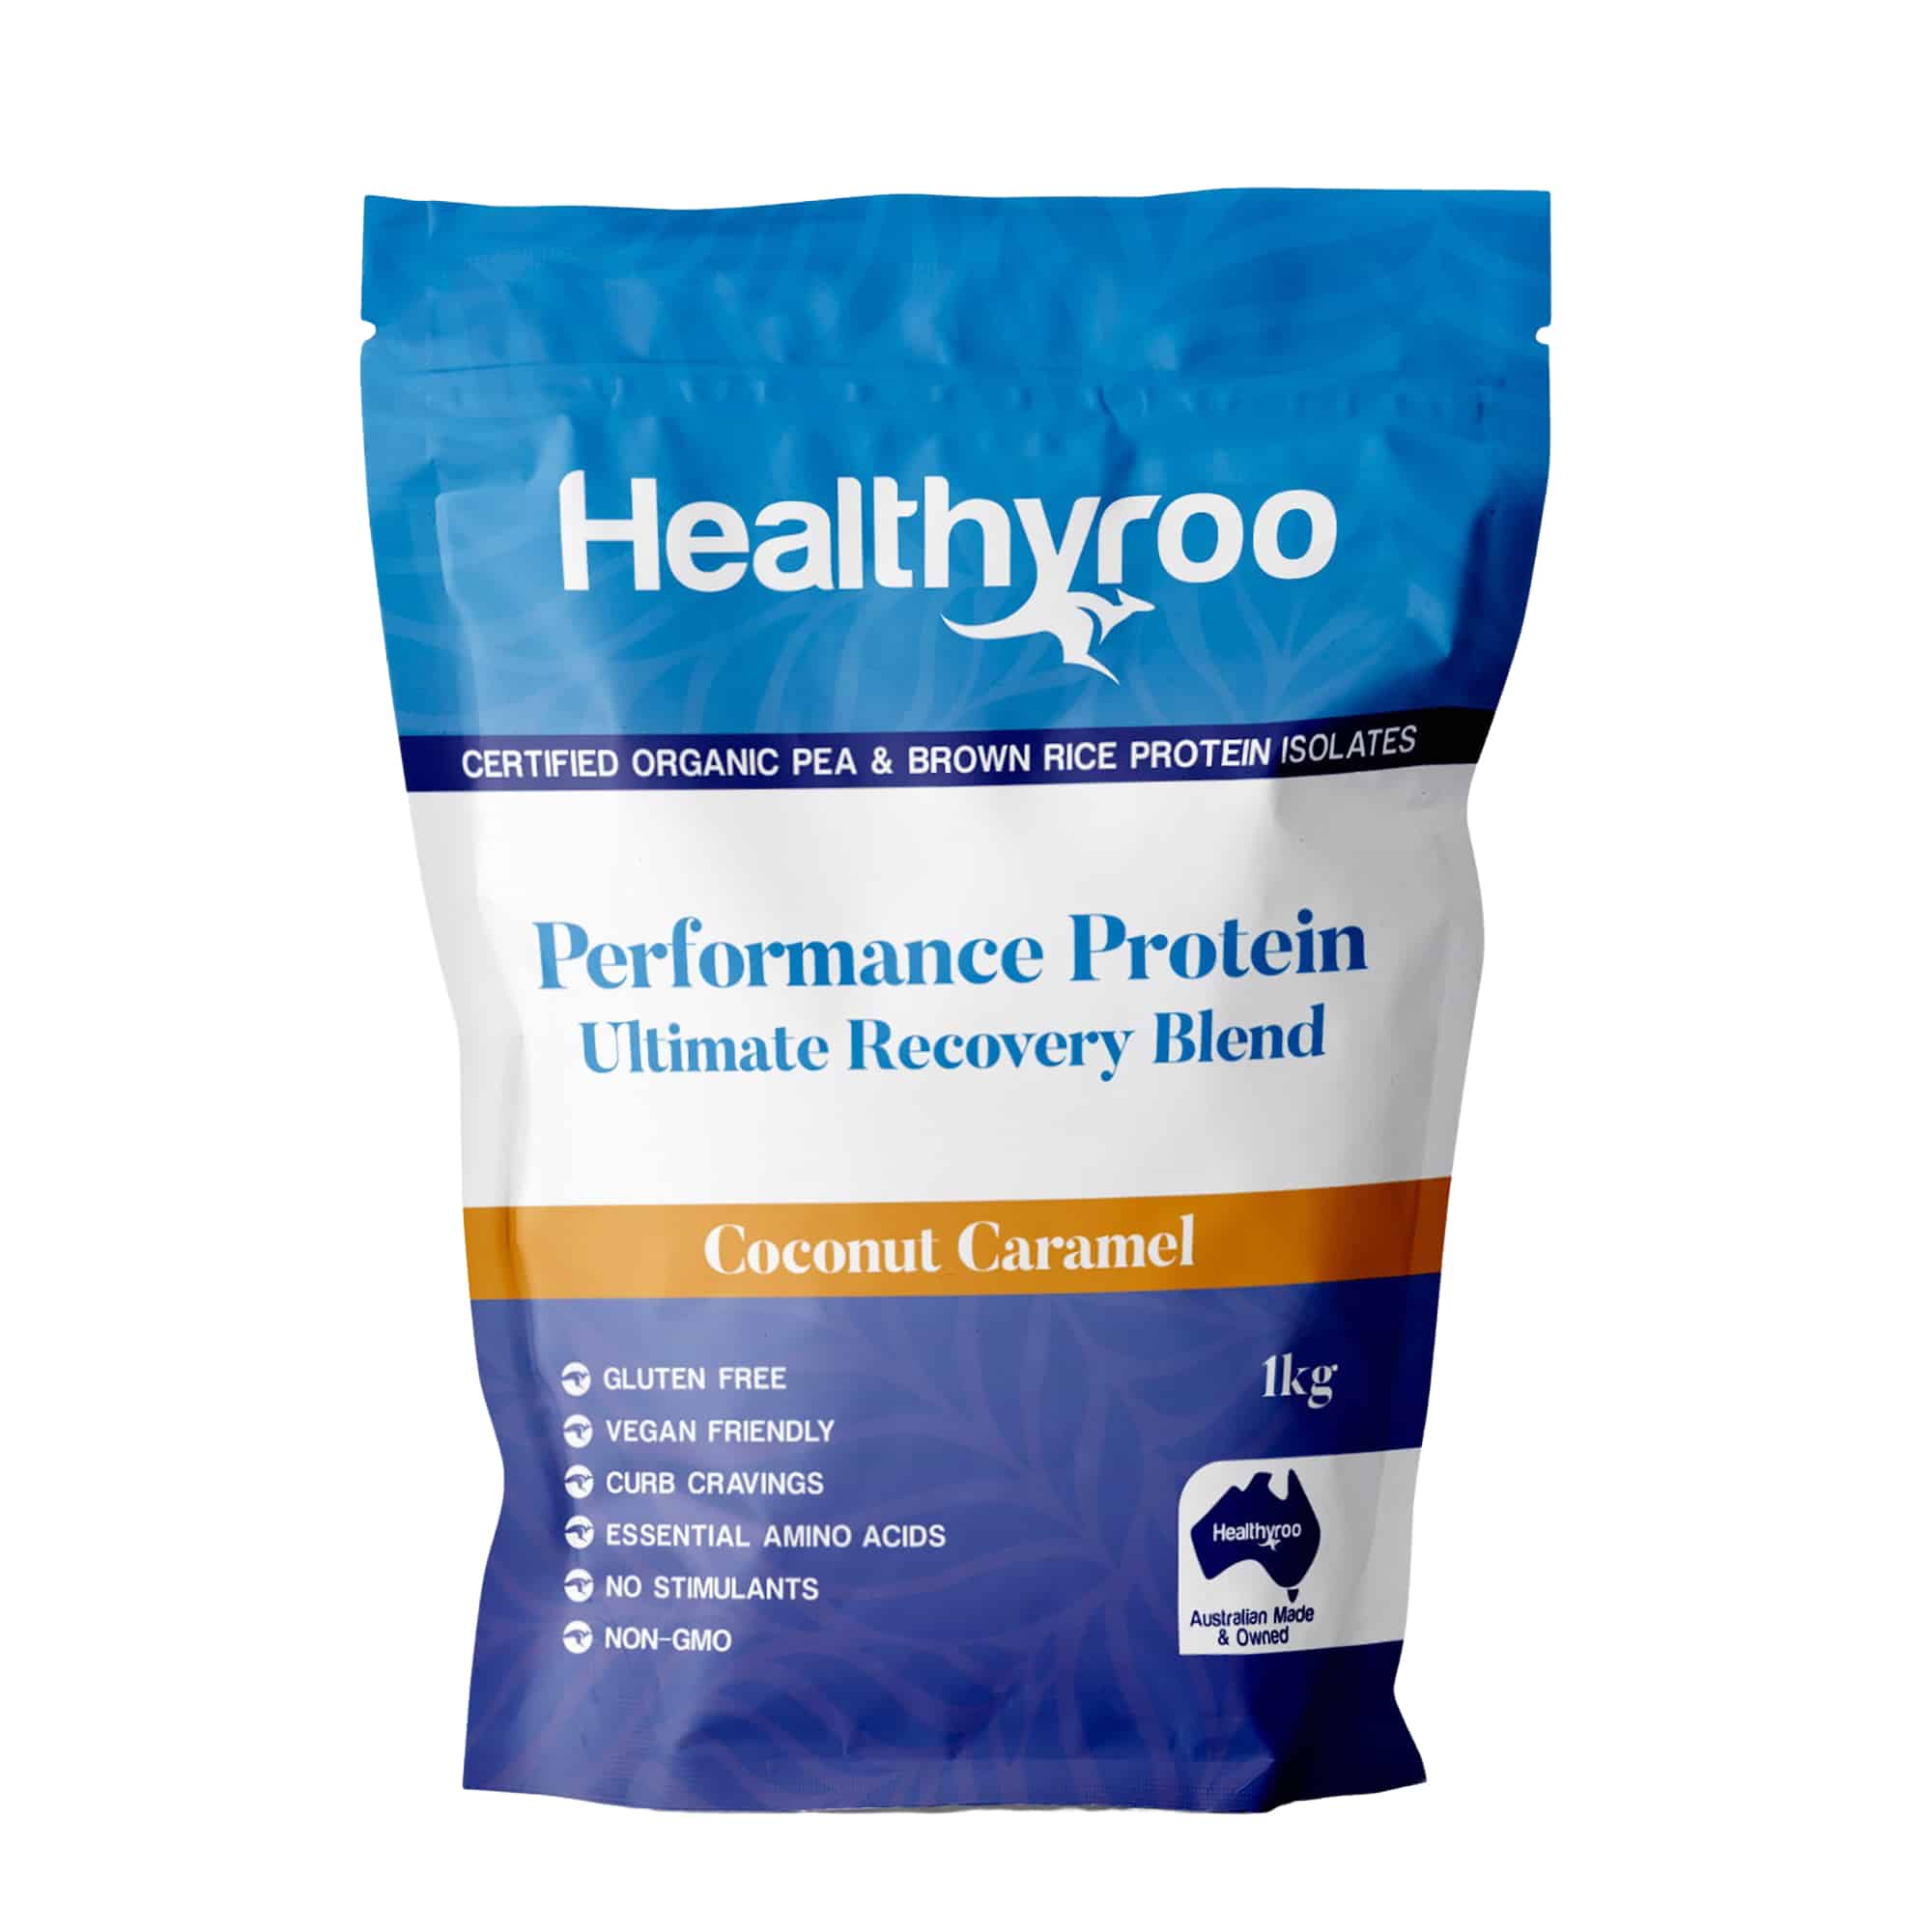 Performance Protein Coconut Caramel